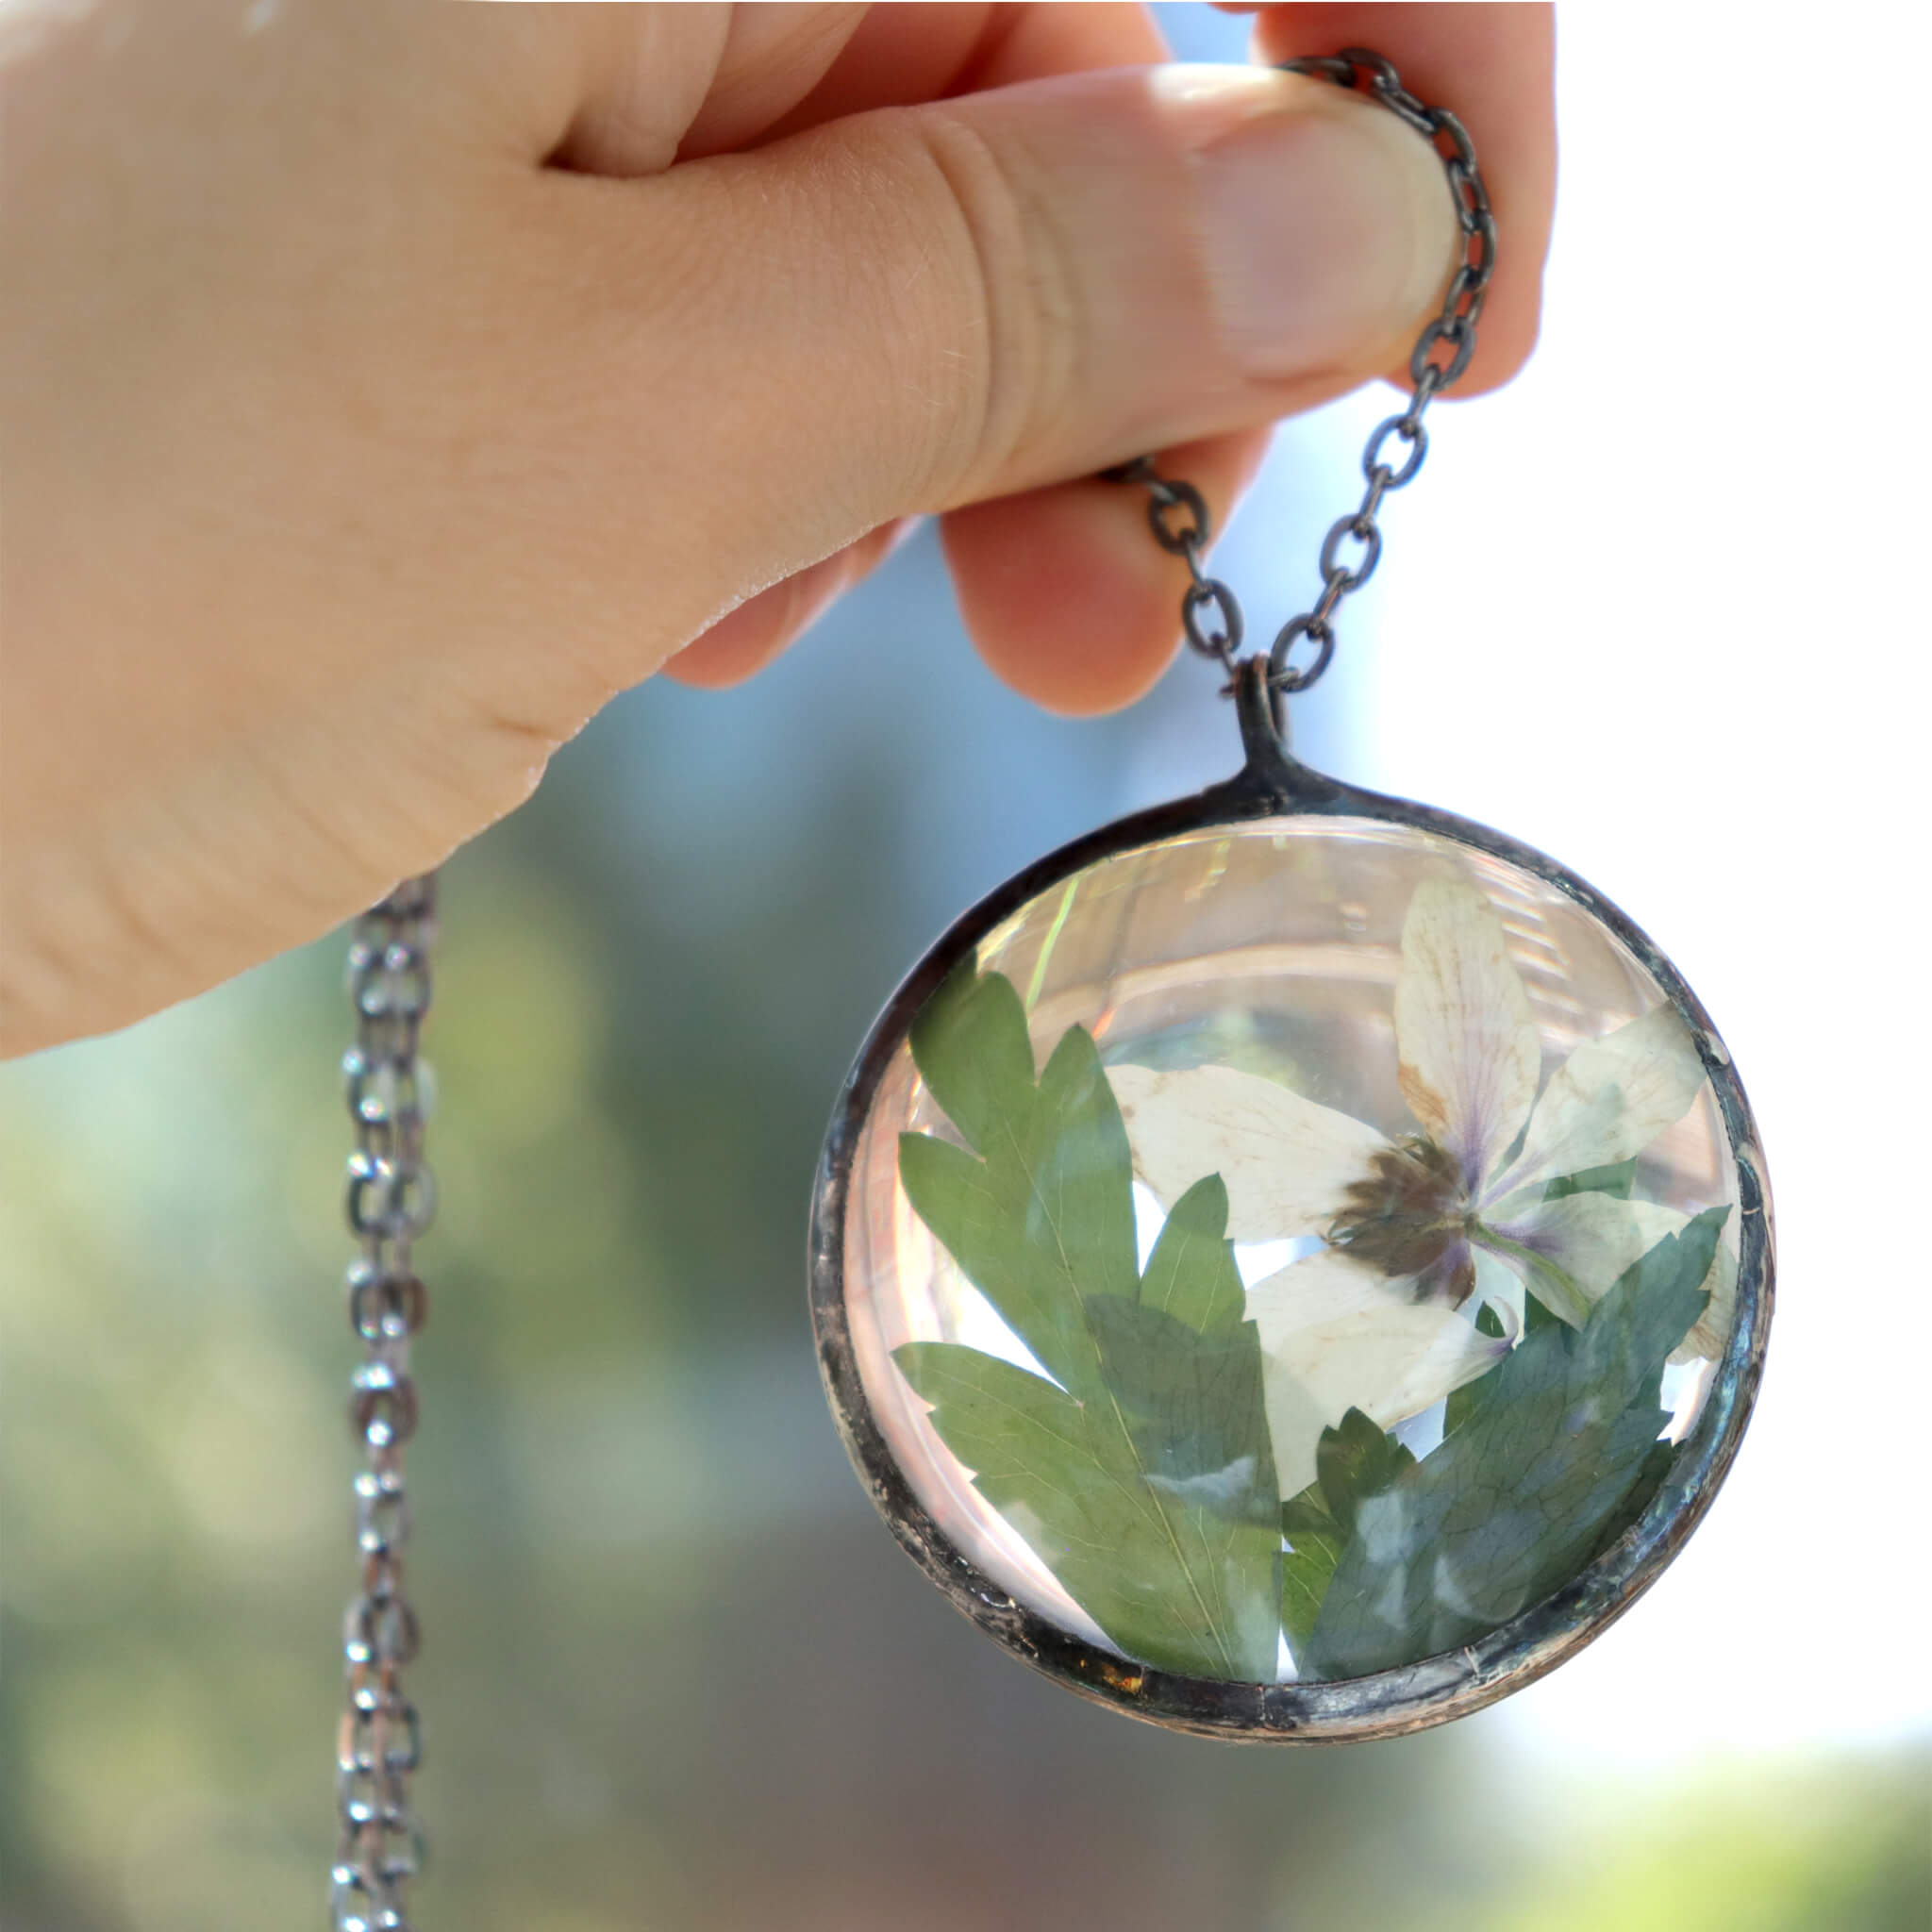 Hand holding round shaped necklace featuring pink pressed flowers with green leaves